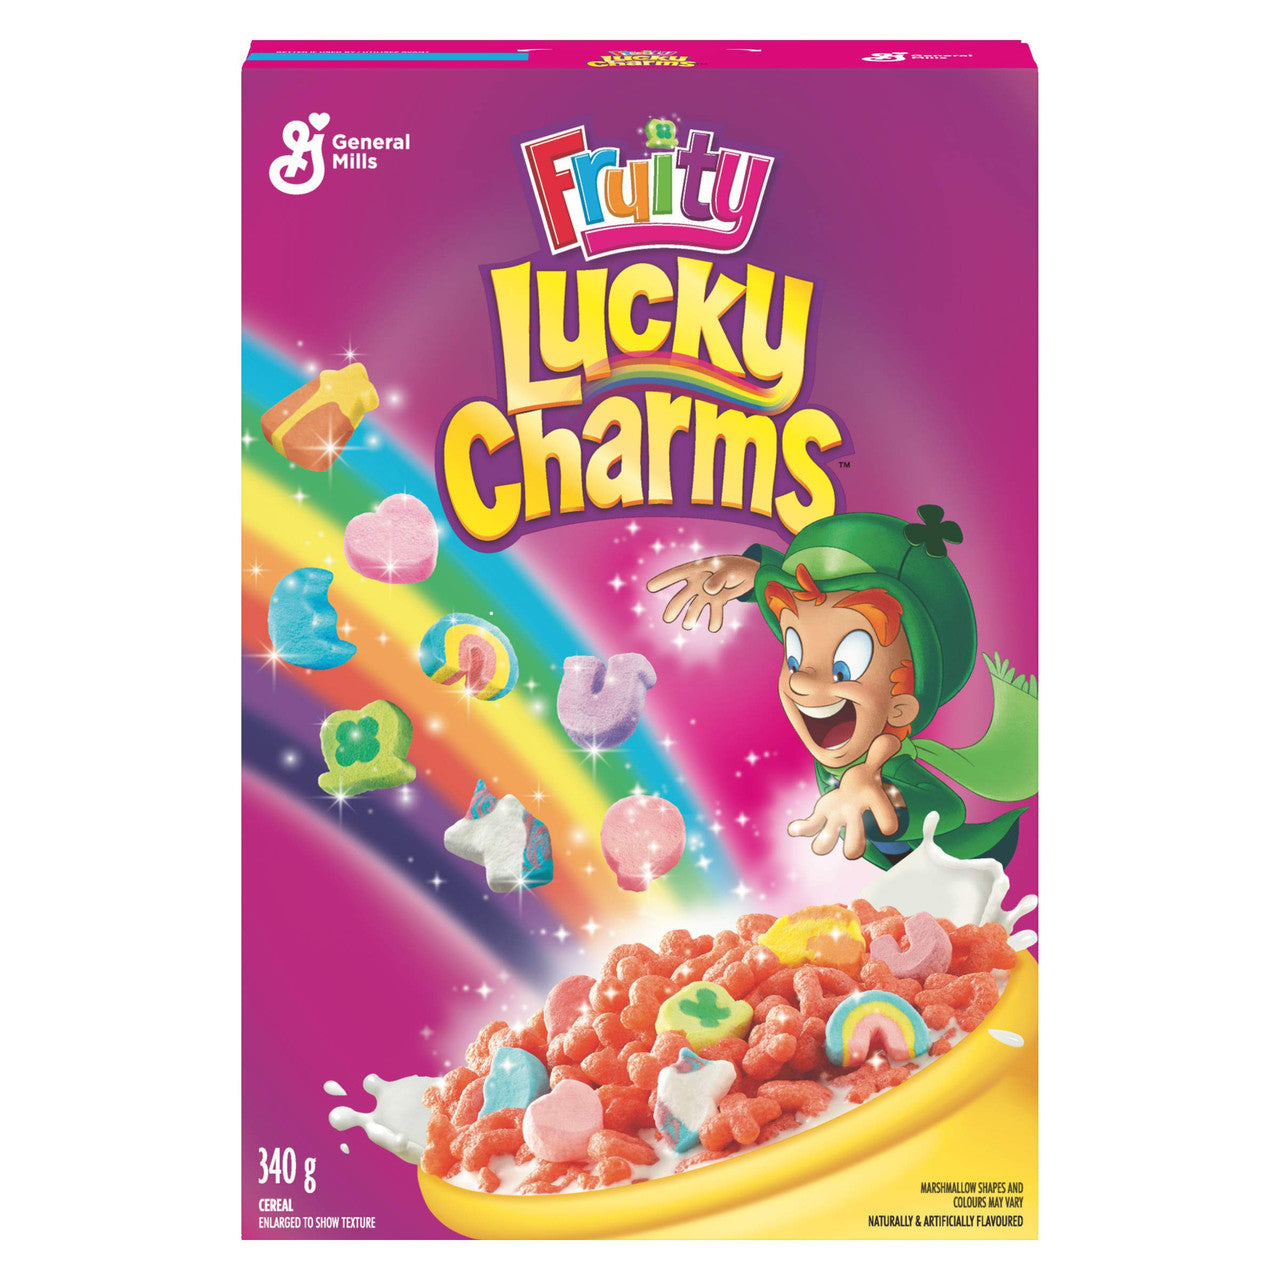 Lucky Charms Cereal/ Marshmallows, 330g/11.64oz{Imported from